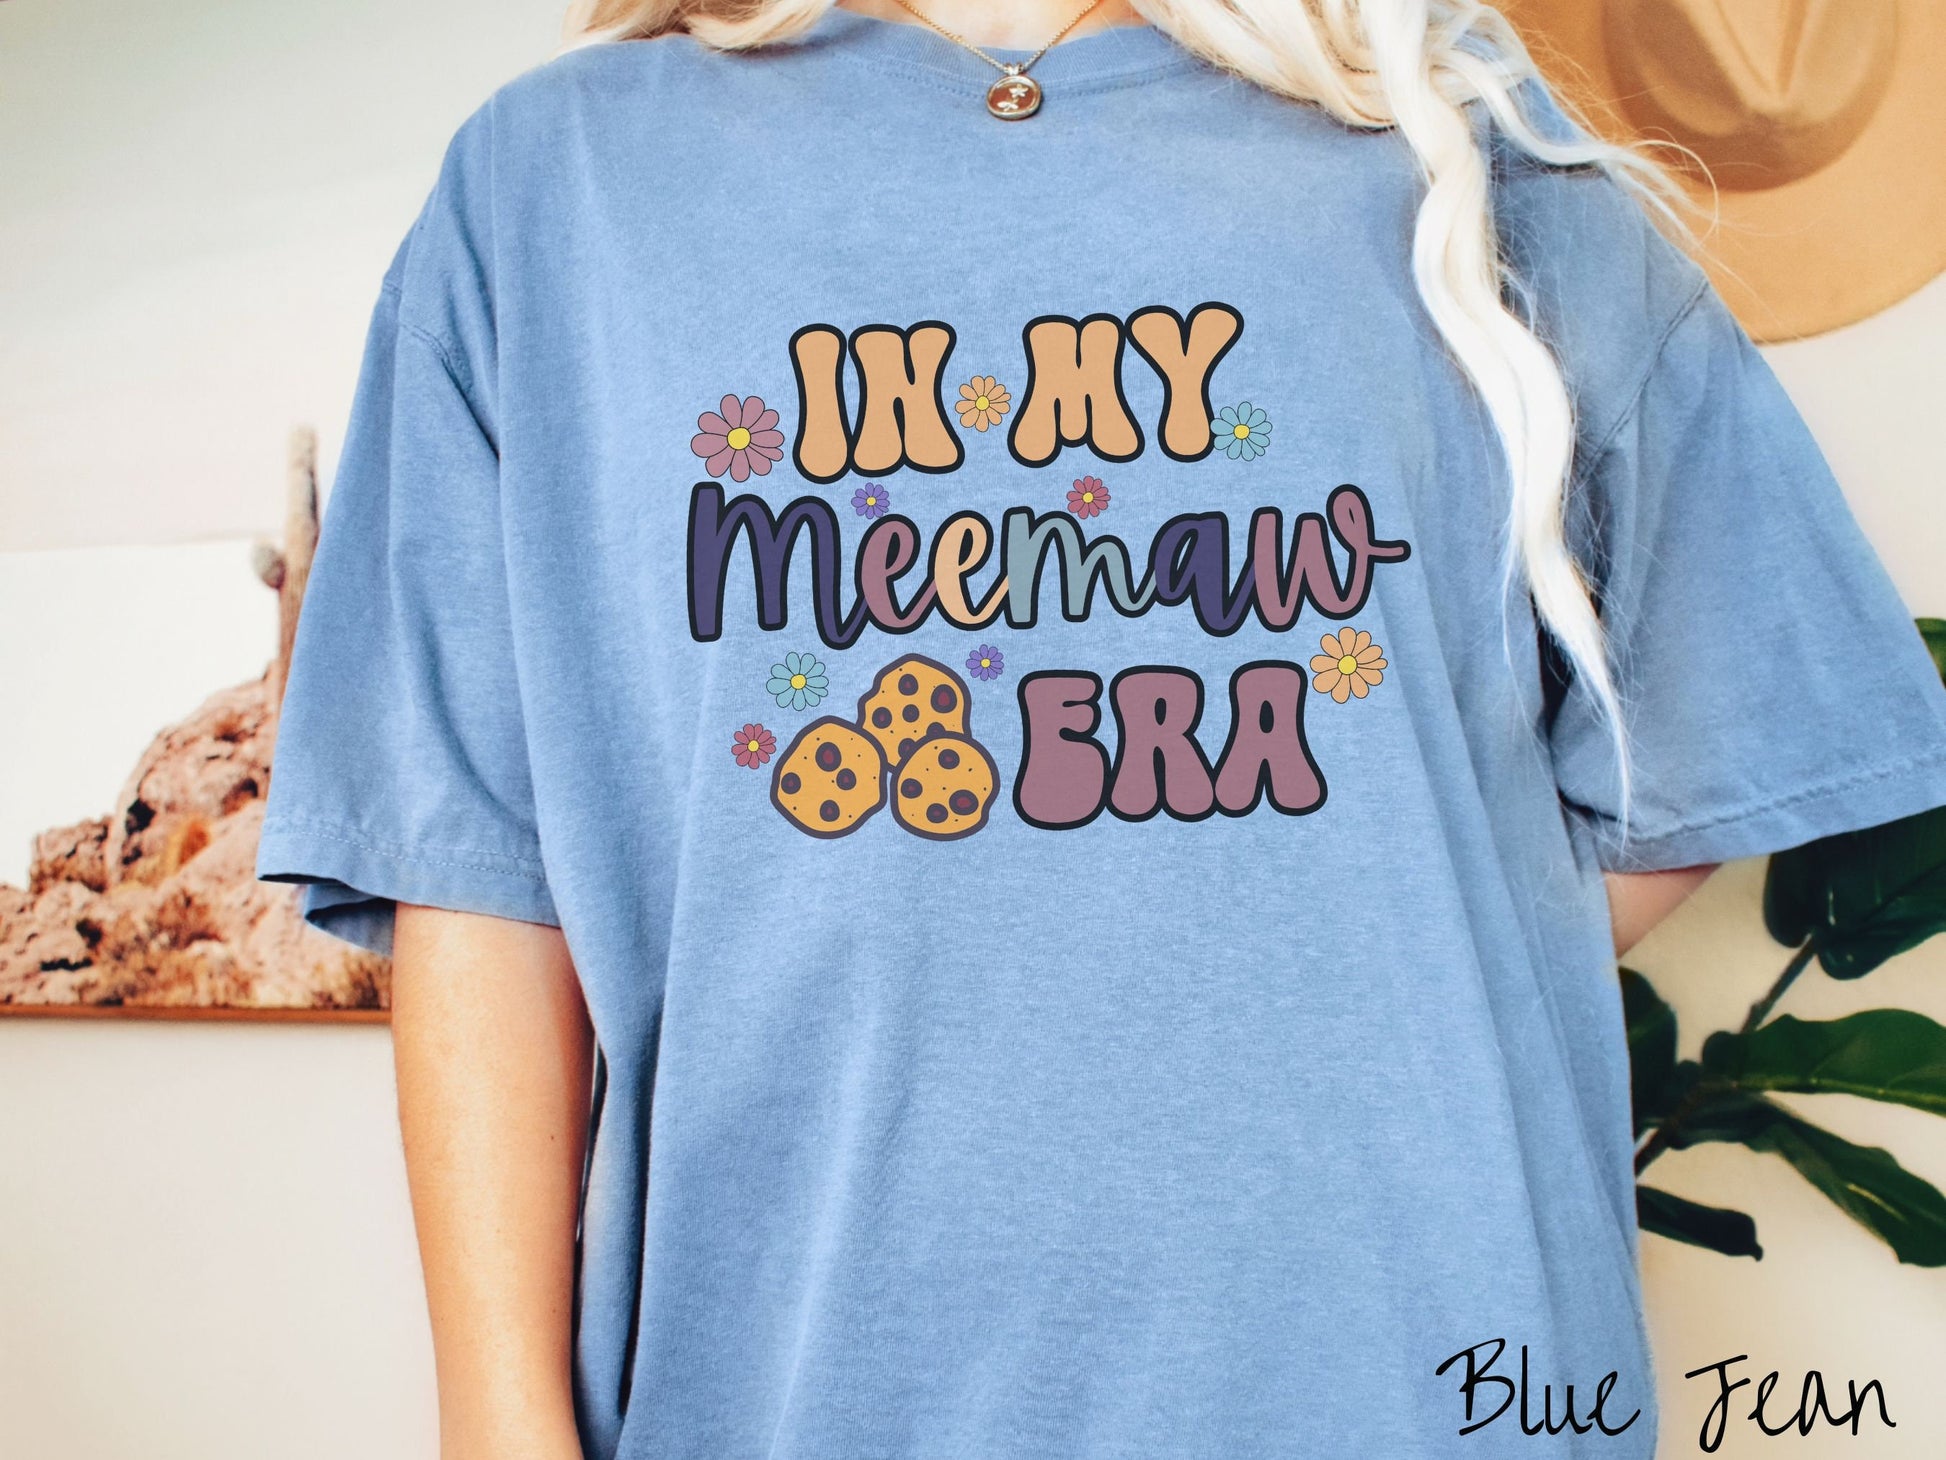 A woman wearing a cute blue jean colored sweatshirt with text on the front saying In My Meemaw Era, with flowers and chocolate chip cookies mixed within the text.